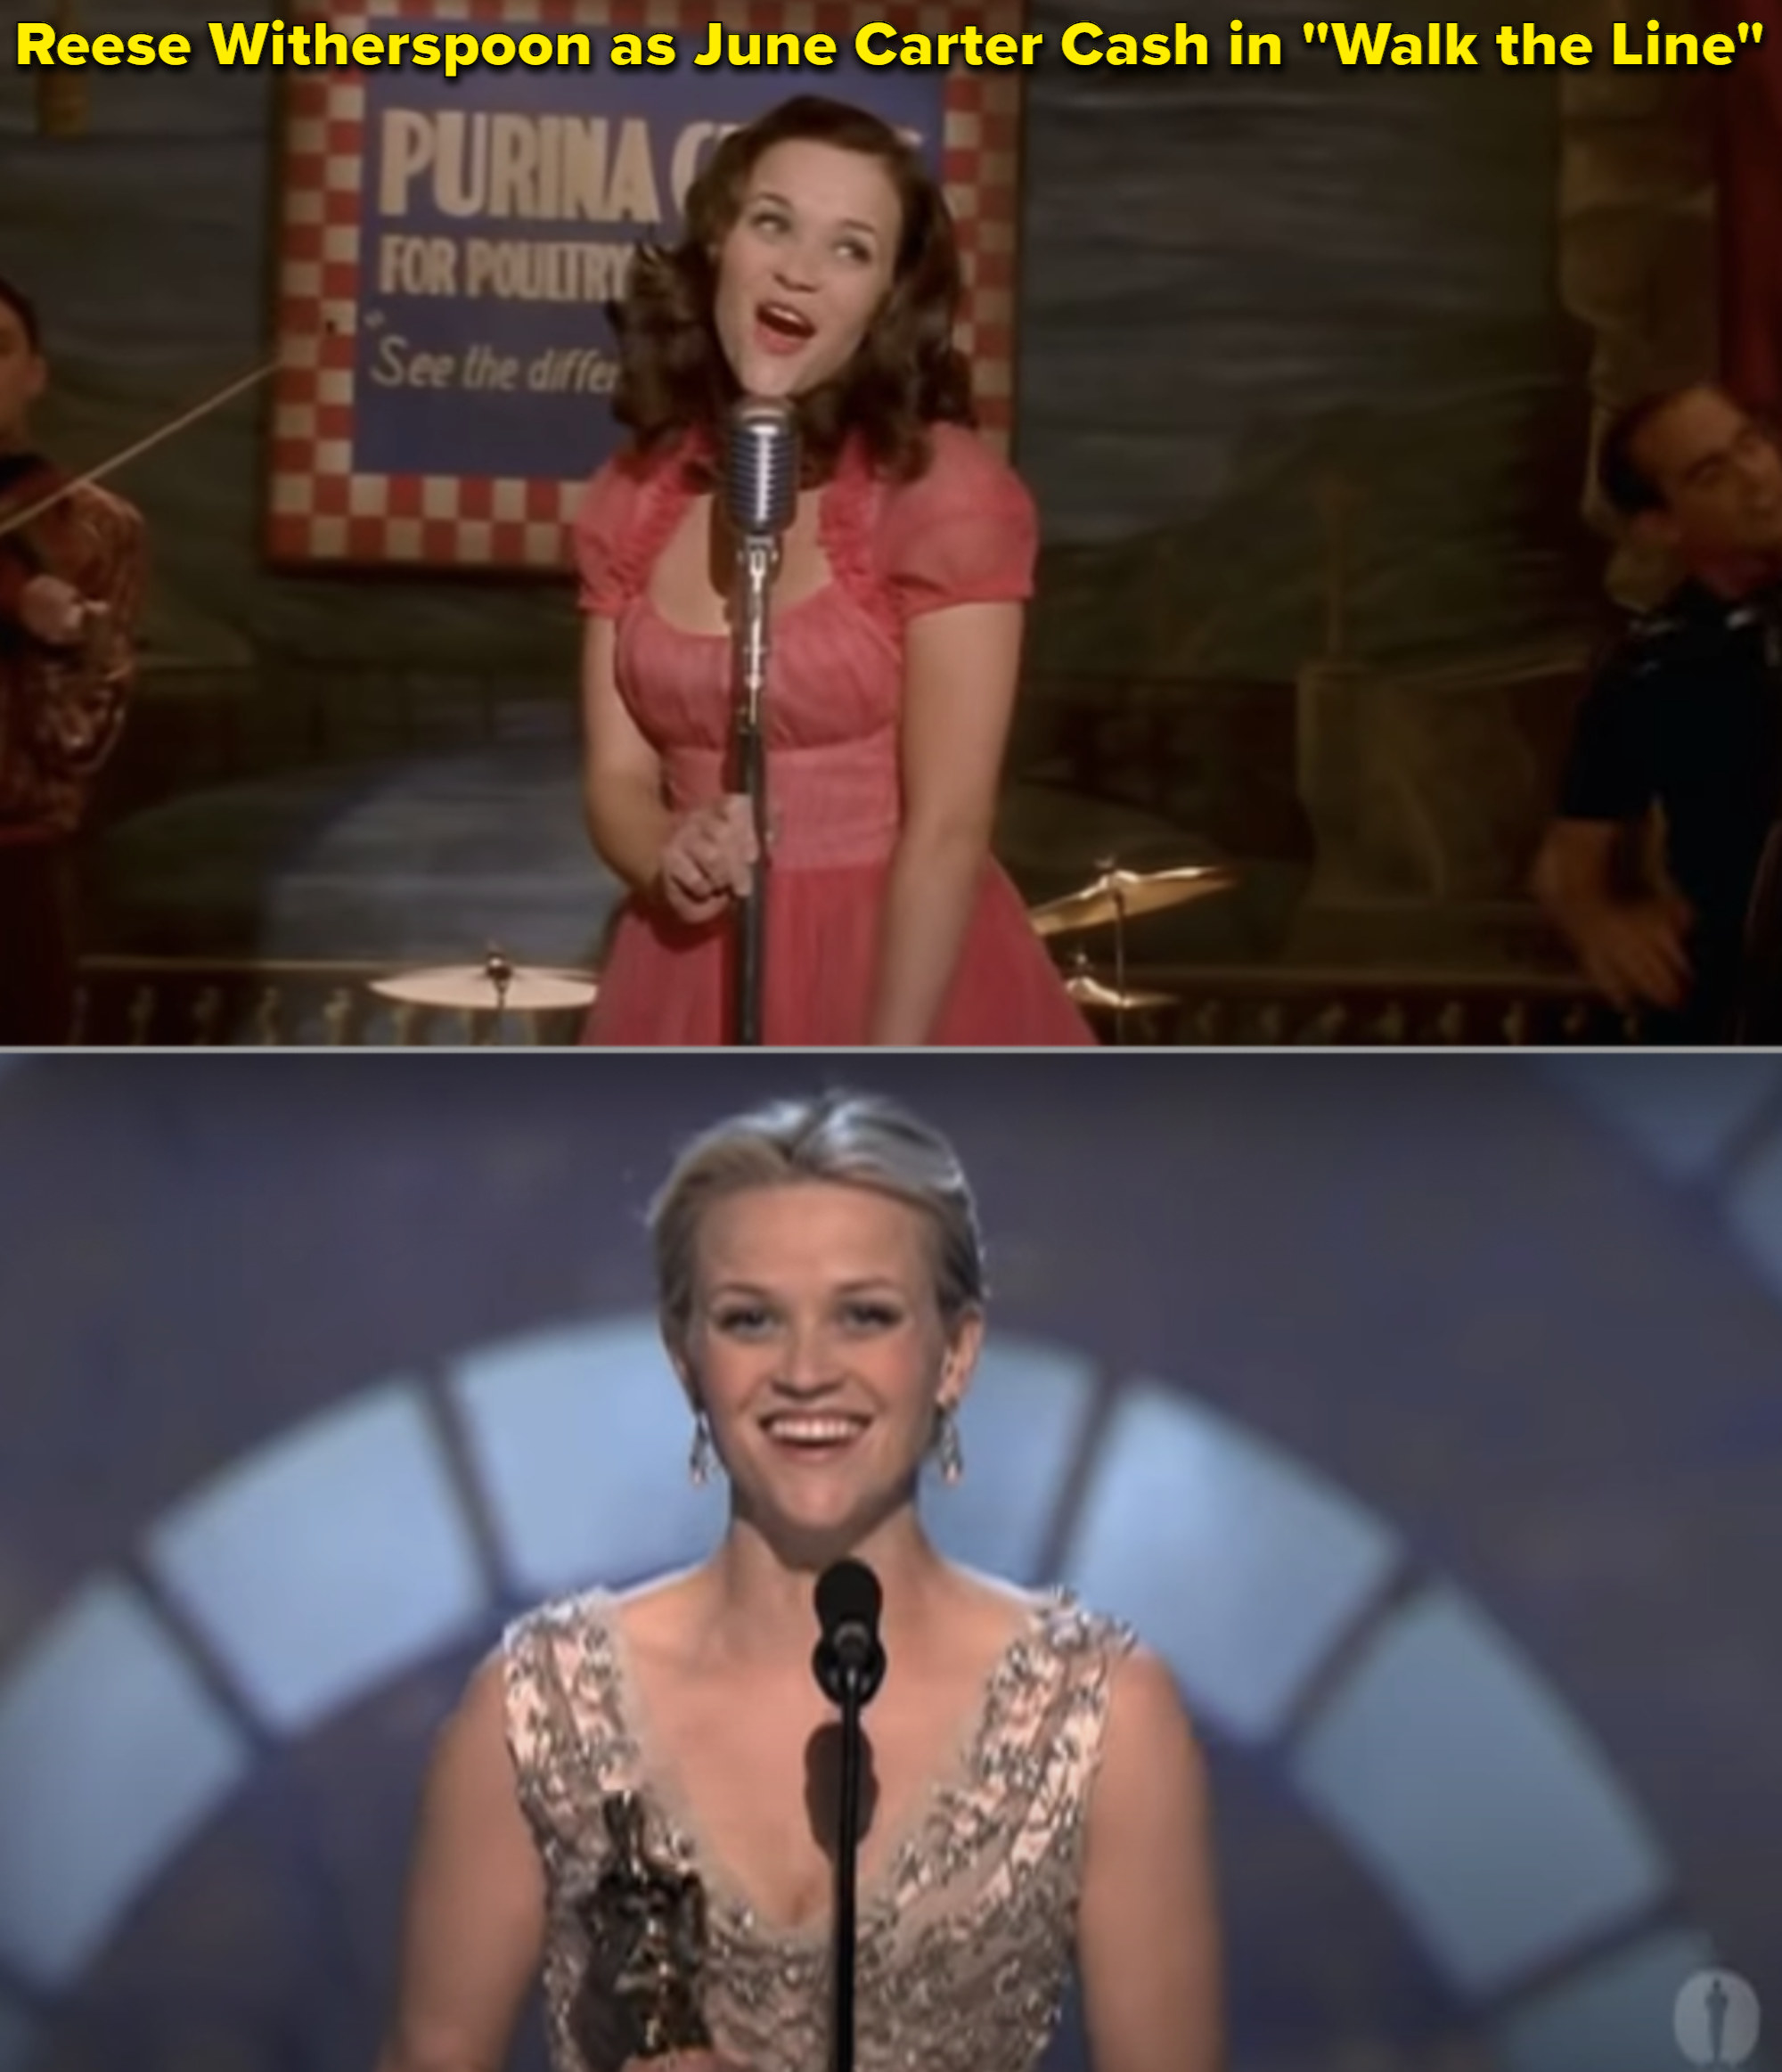 Reese on stage in the movie vs. her accepting her Oscar